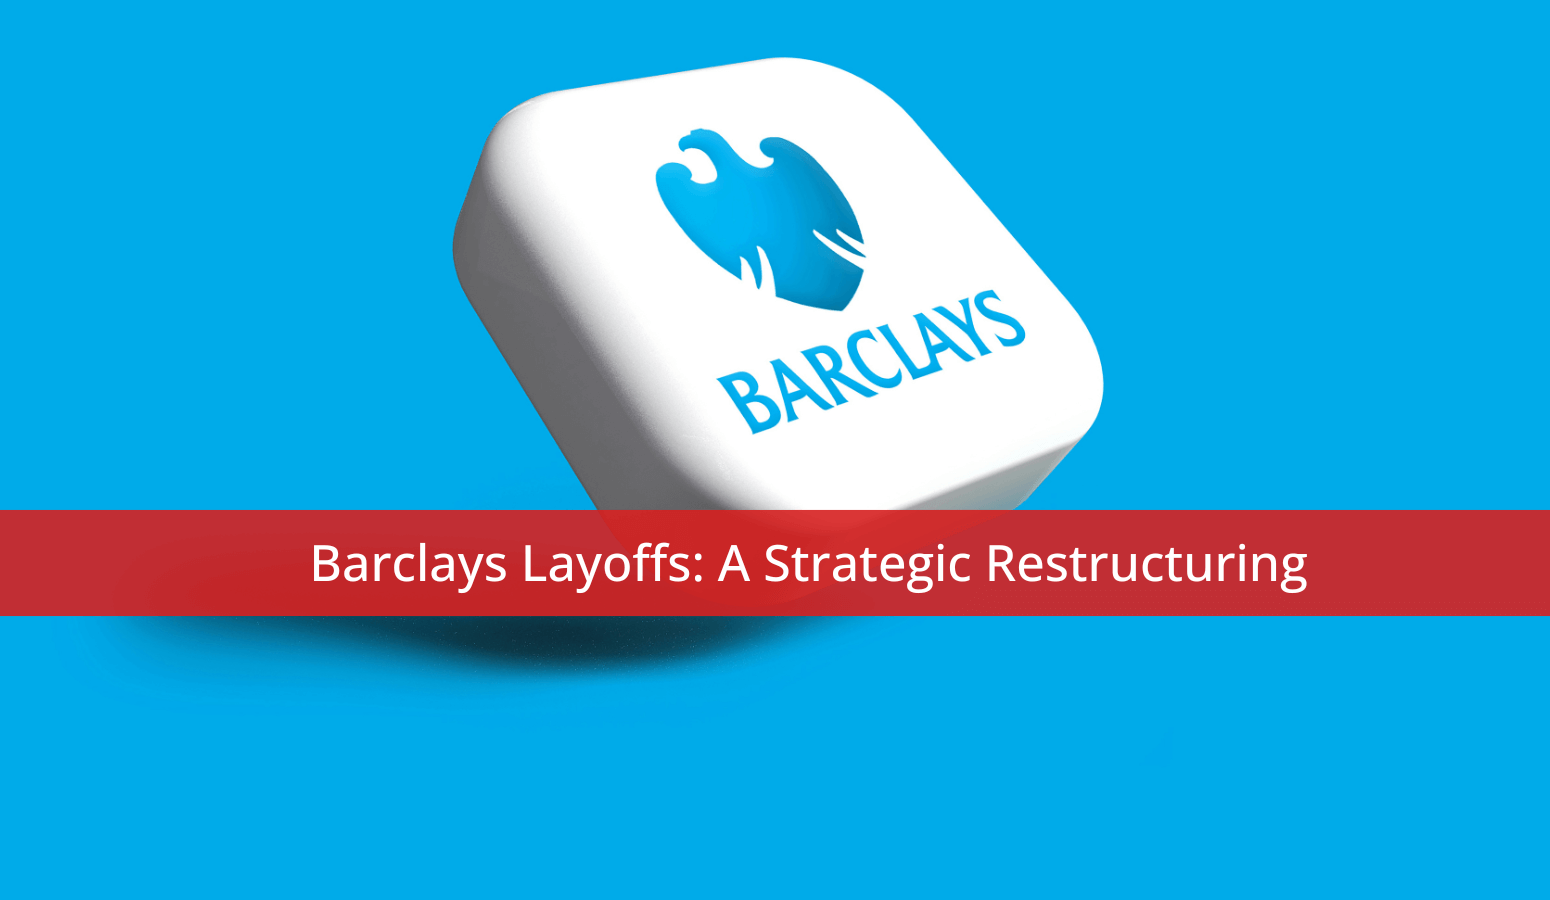 Featured image for “Barclays Layoffs: A Strategic Restructuring”